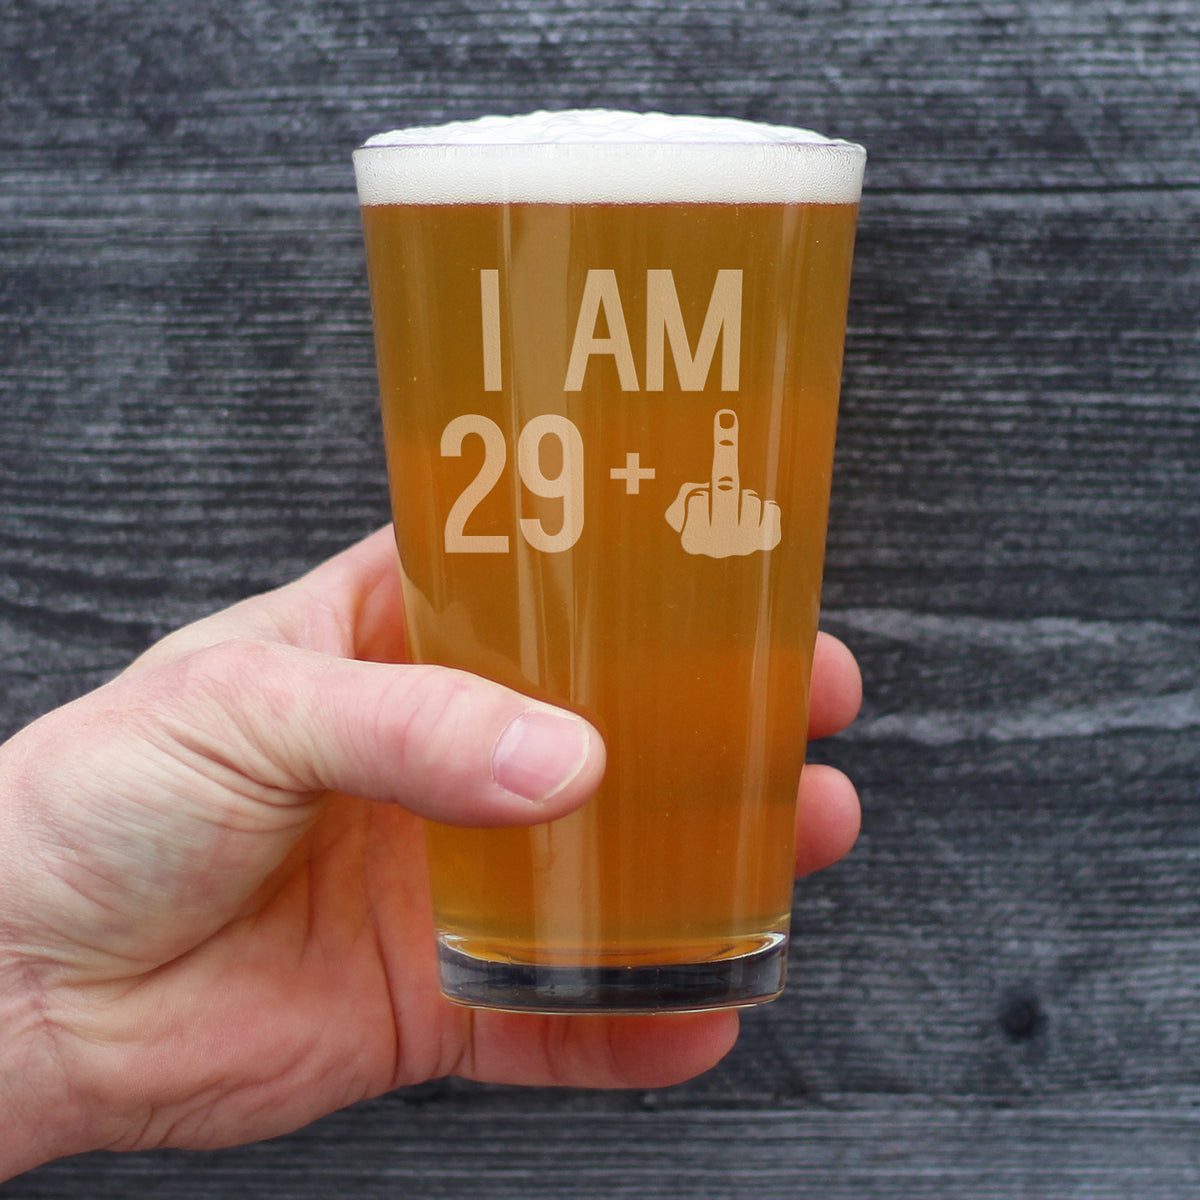 29 + 1 Middle Finger - 16 oz Pint Glass for Beer - Funny 30th Birthday Gifts for Men and Women Turning 30